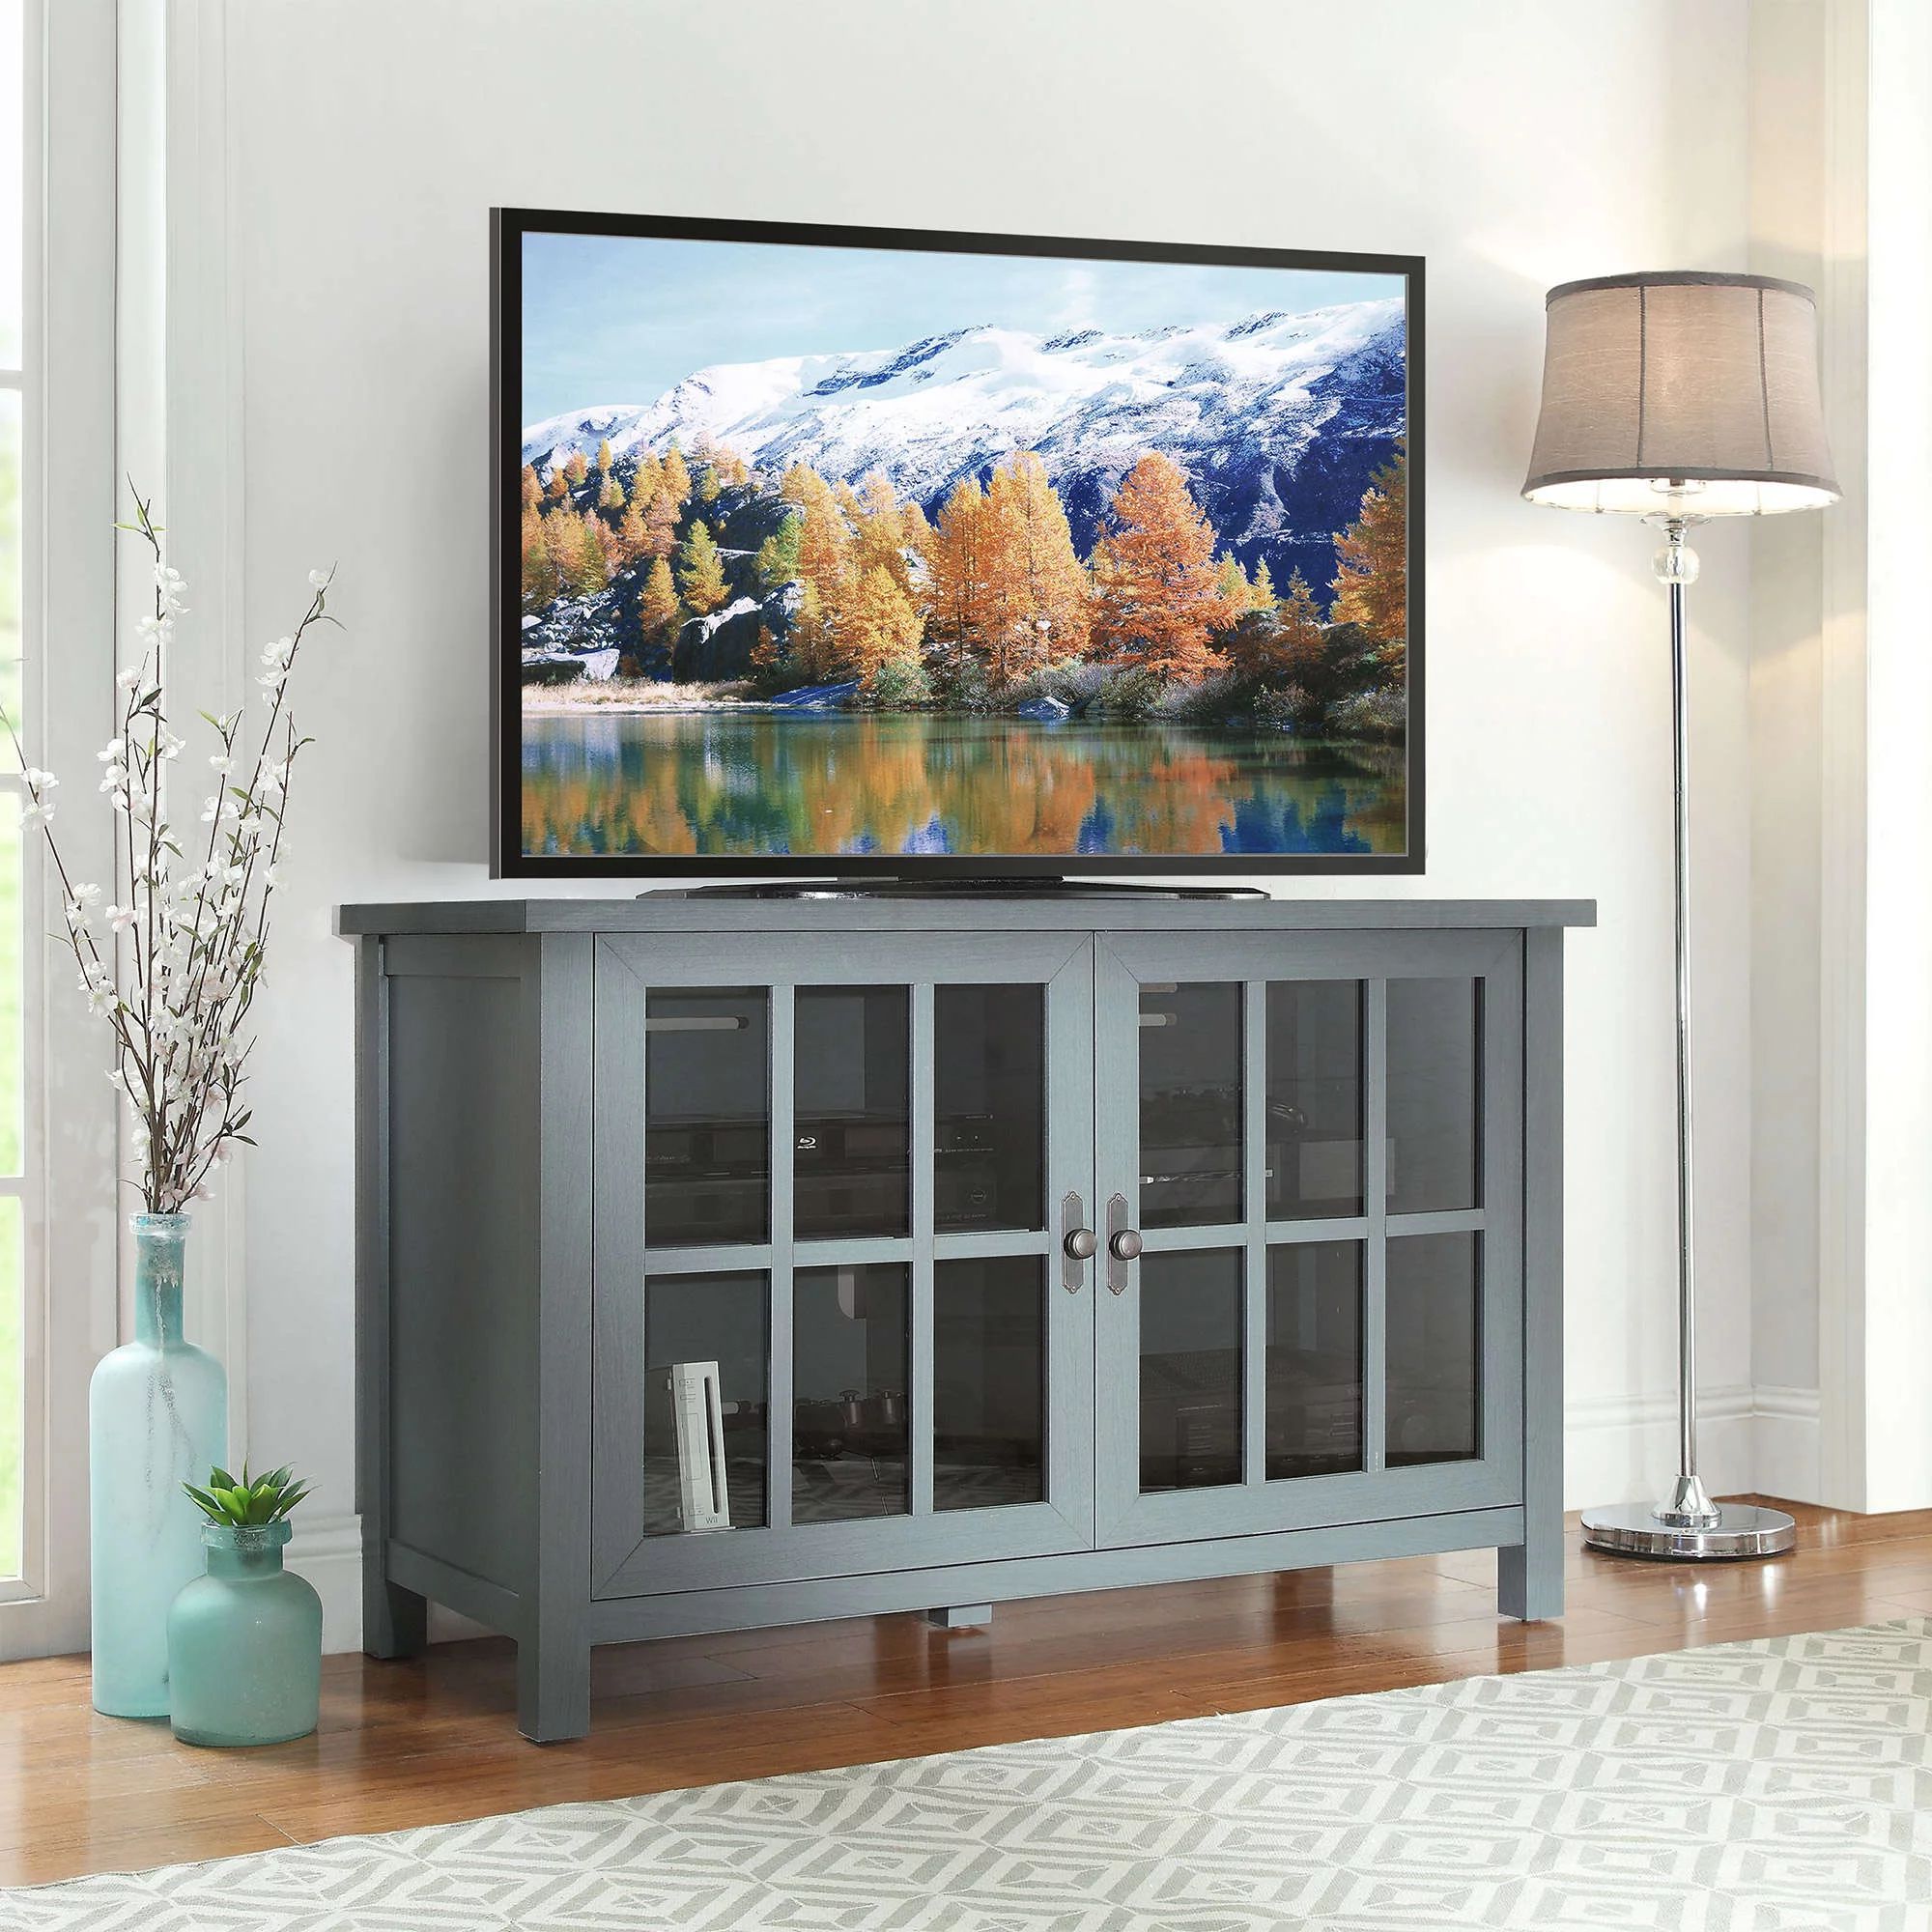 Better Homes & Gardens Oxford Square TV Stand for TVs up to 55", Blue | Walmart (US)